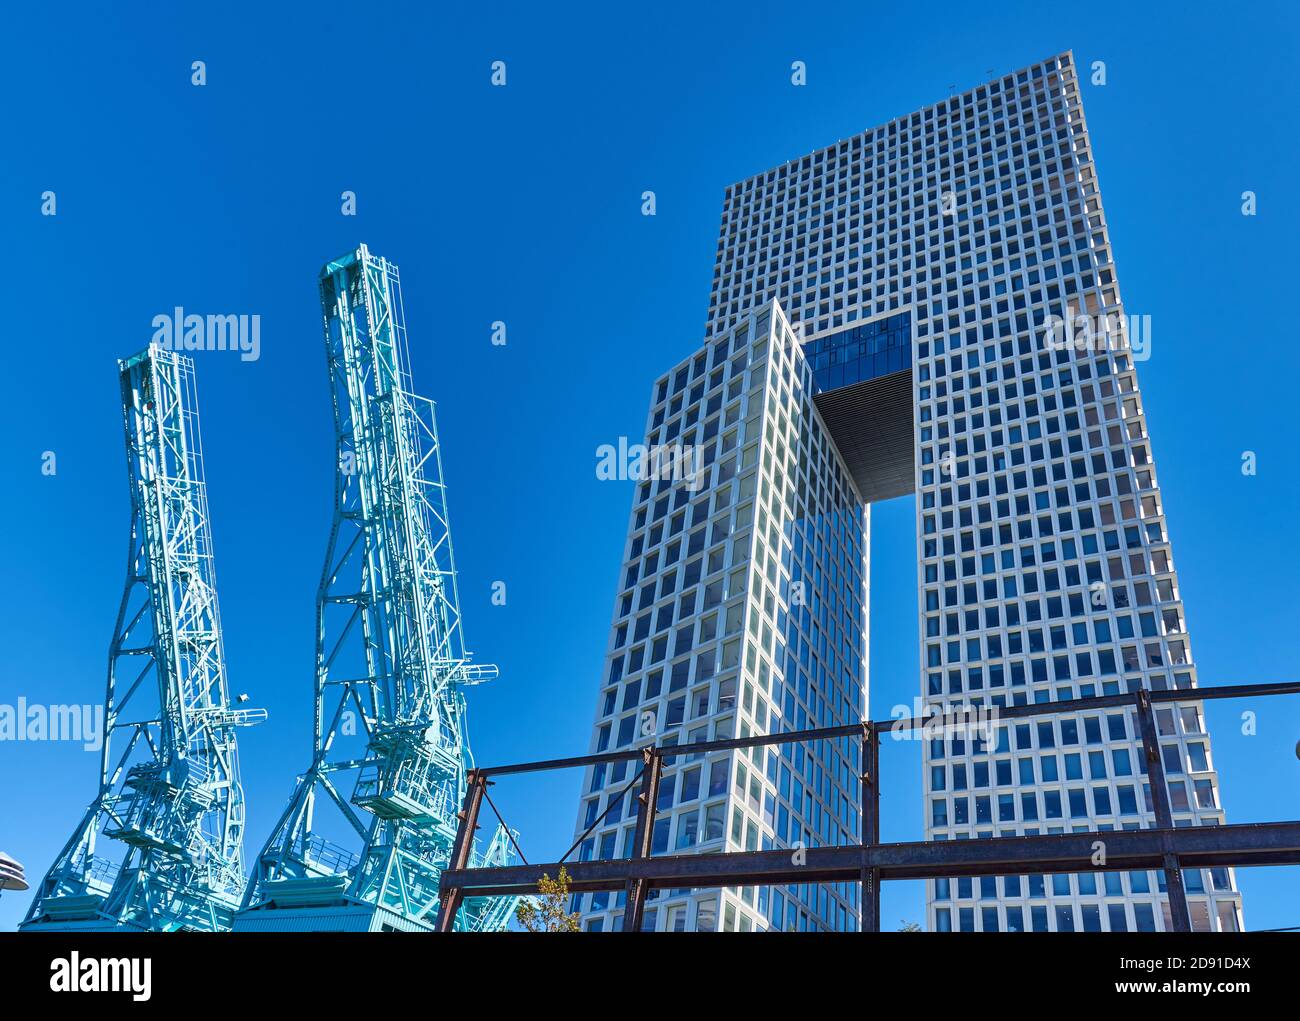 Cranes from the old Domino Sugar Factory in Domino Park rise next to a contemporary 45-story mixed use building Stock Photo